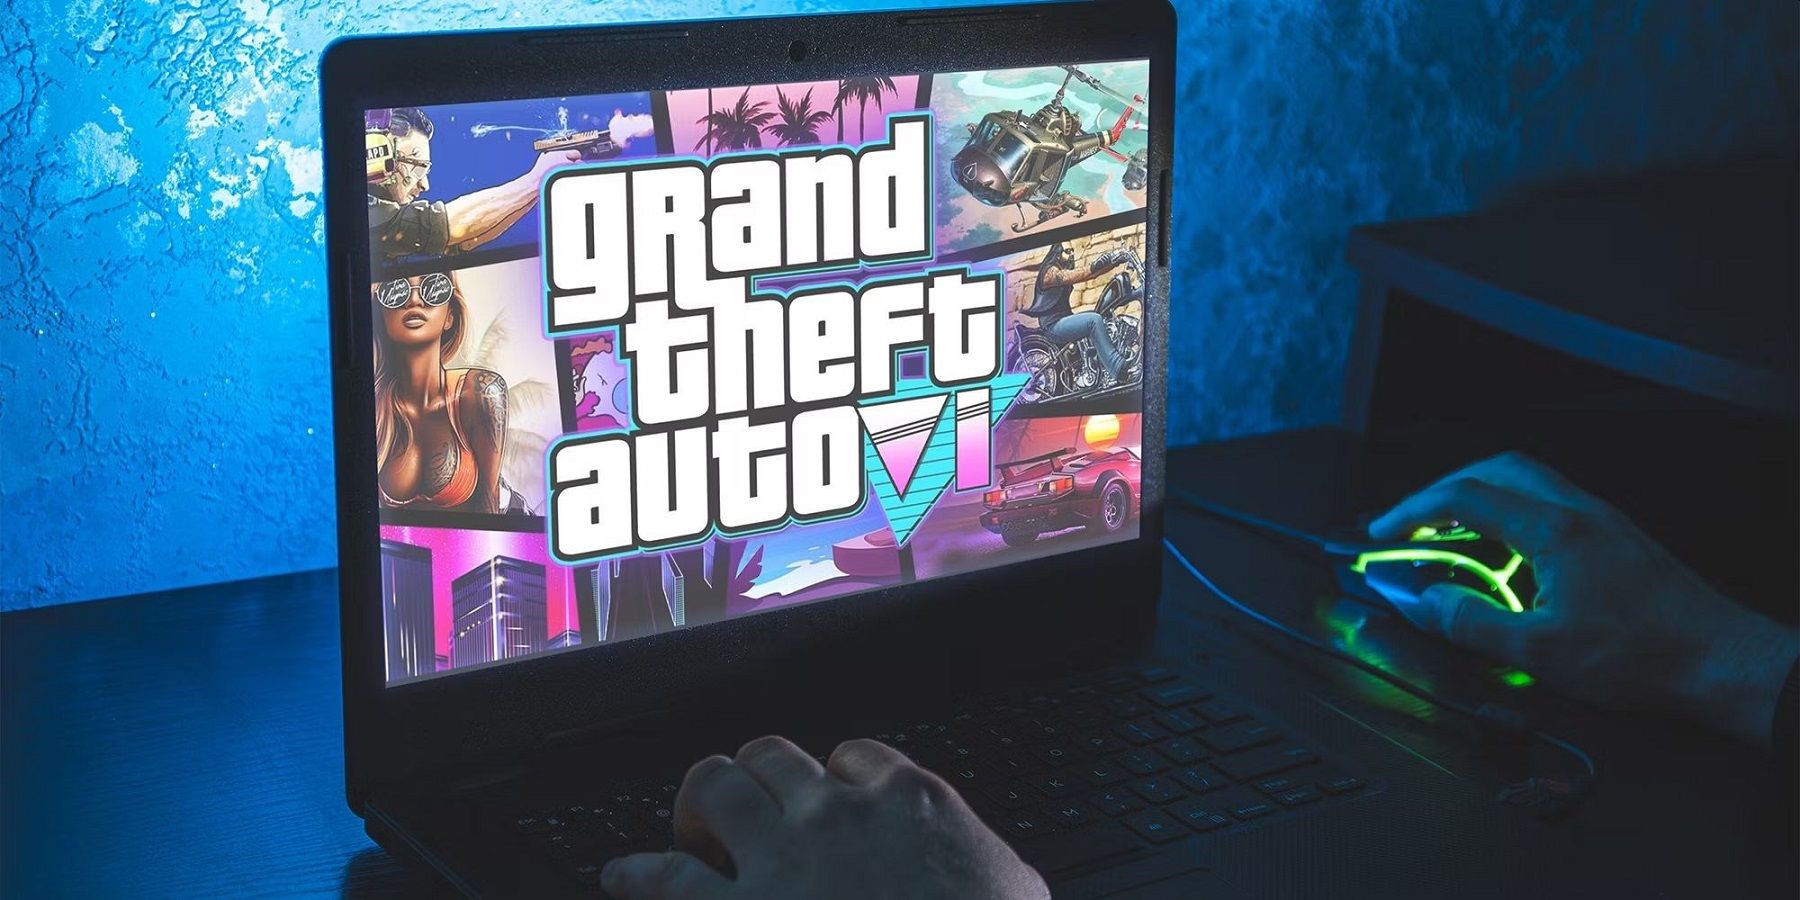 Photo of a laptop with a Grand Theft Auto 6-style image on the screen.